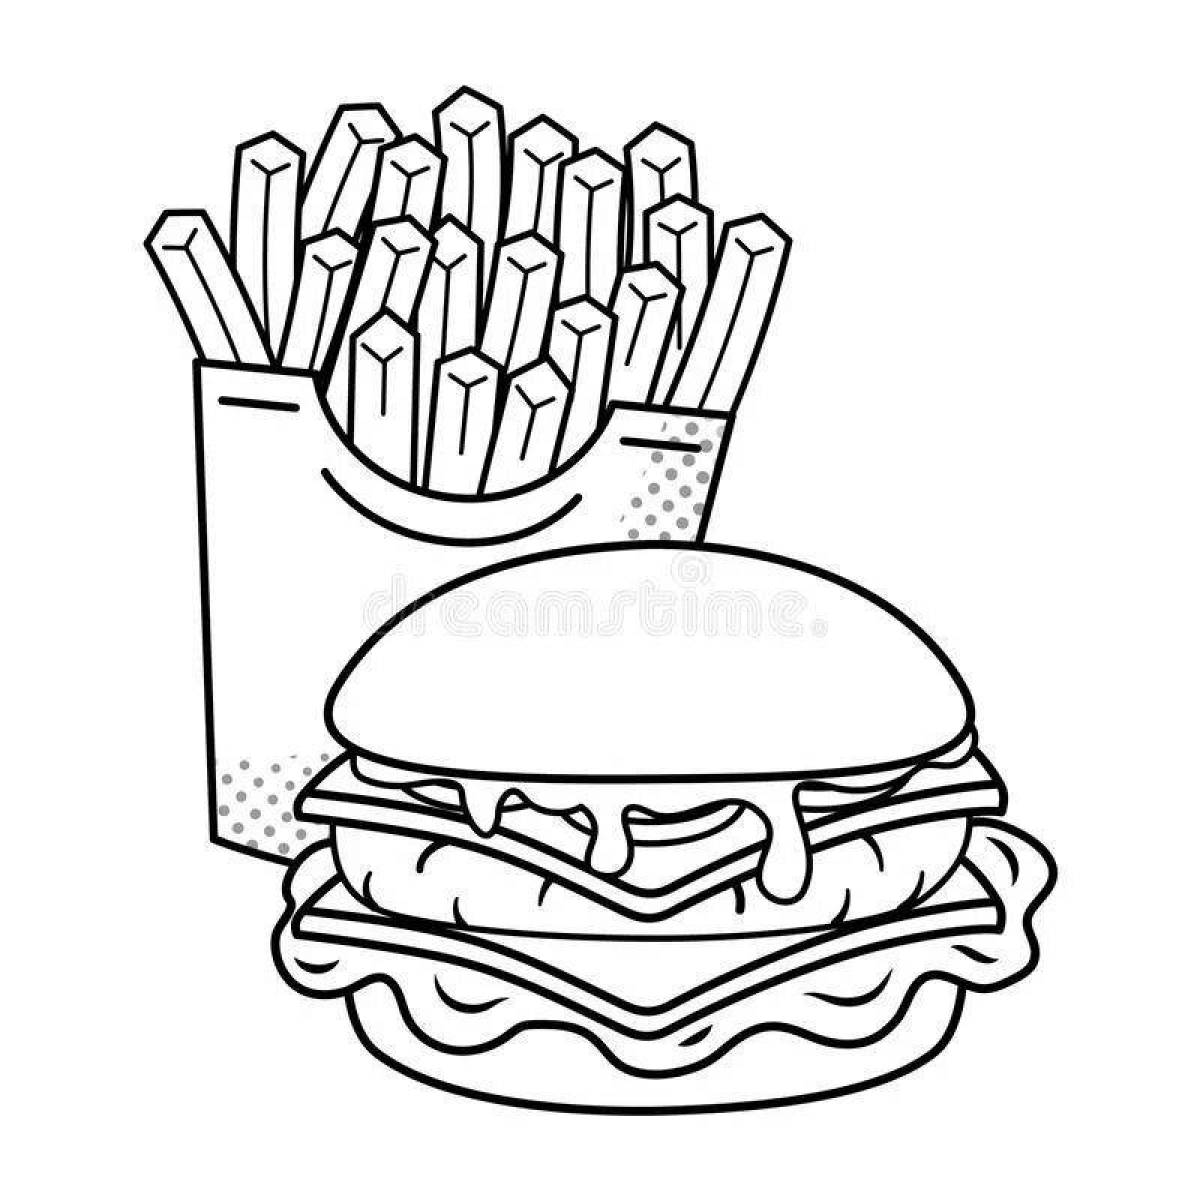 Burger and fries #8